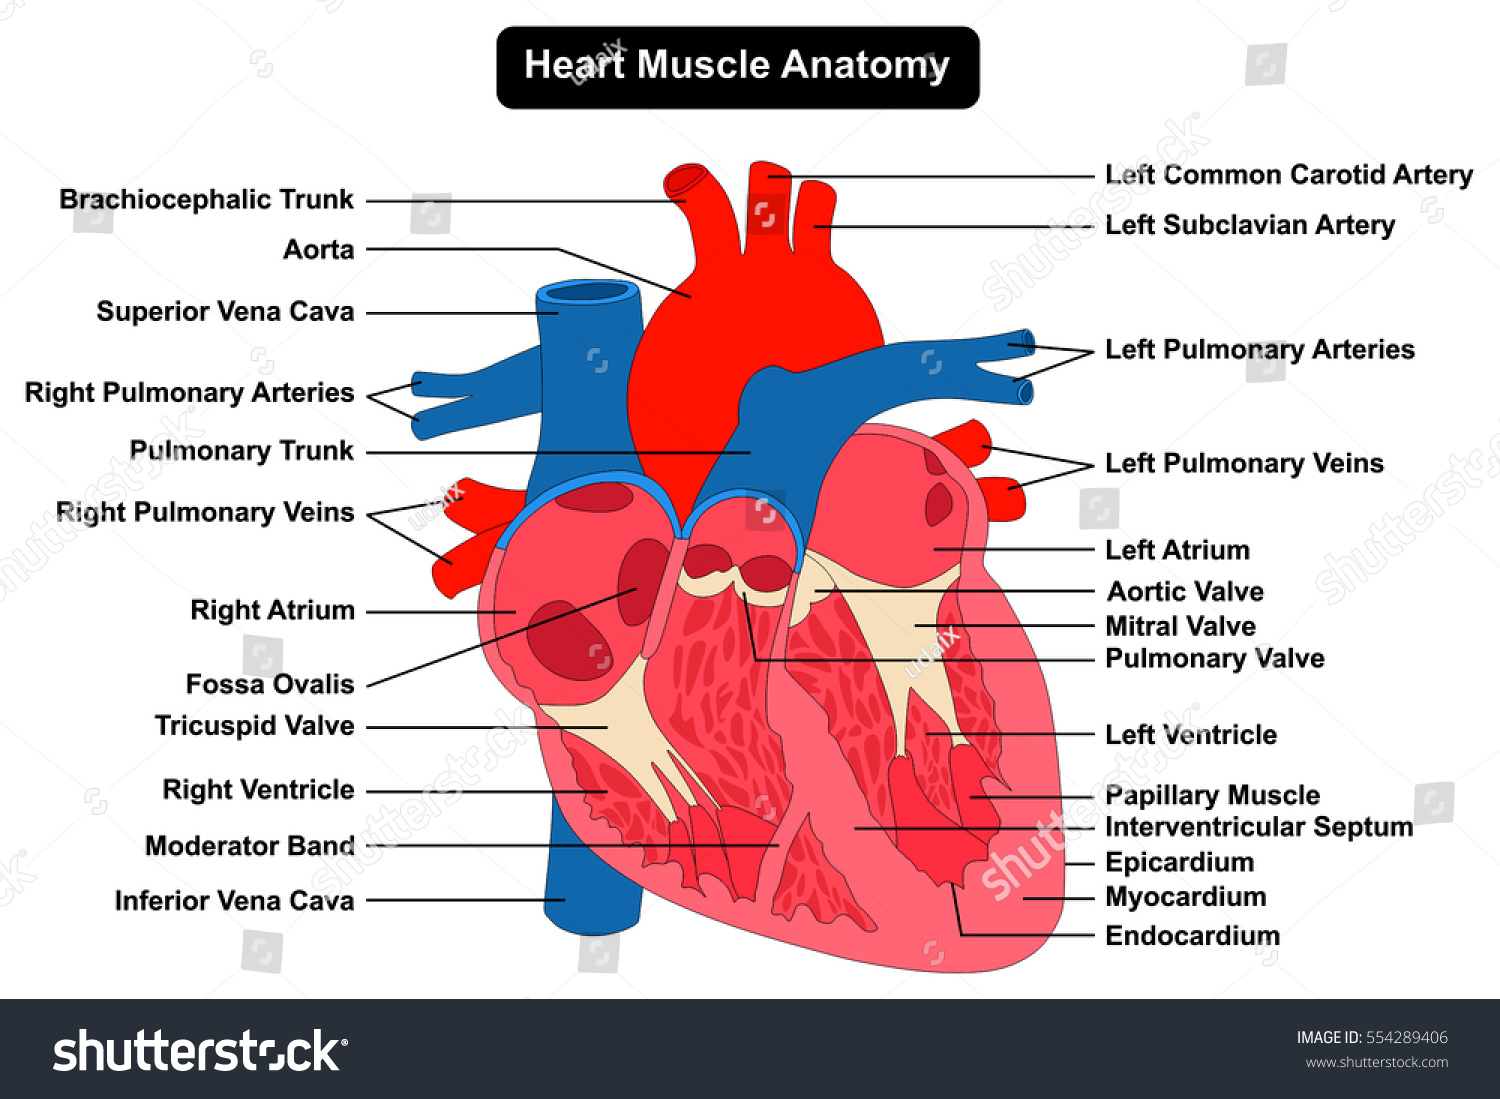 Human Heart Muscle Structure Anatomy Infographic Stock Vector